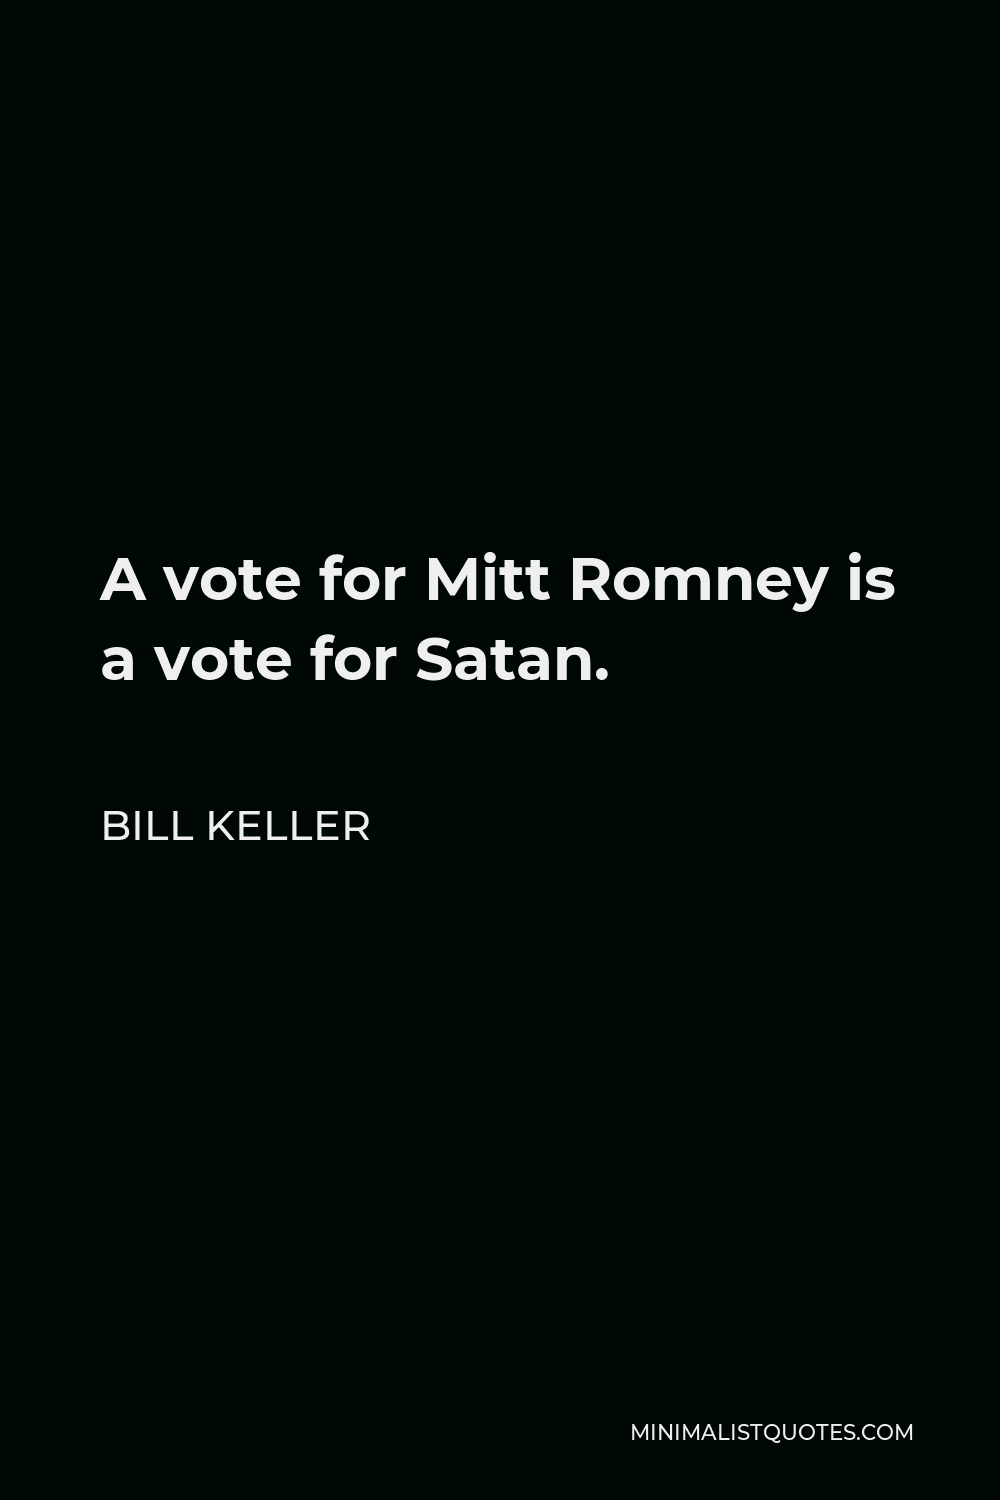 Bill Keller Quote - A vote for Mitt Romney is a vote for Satan.